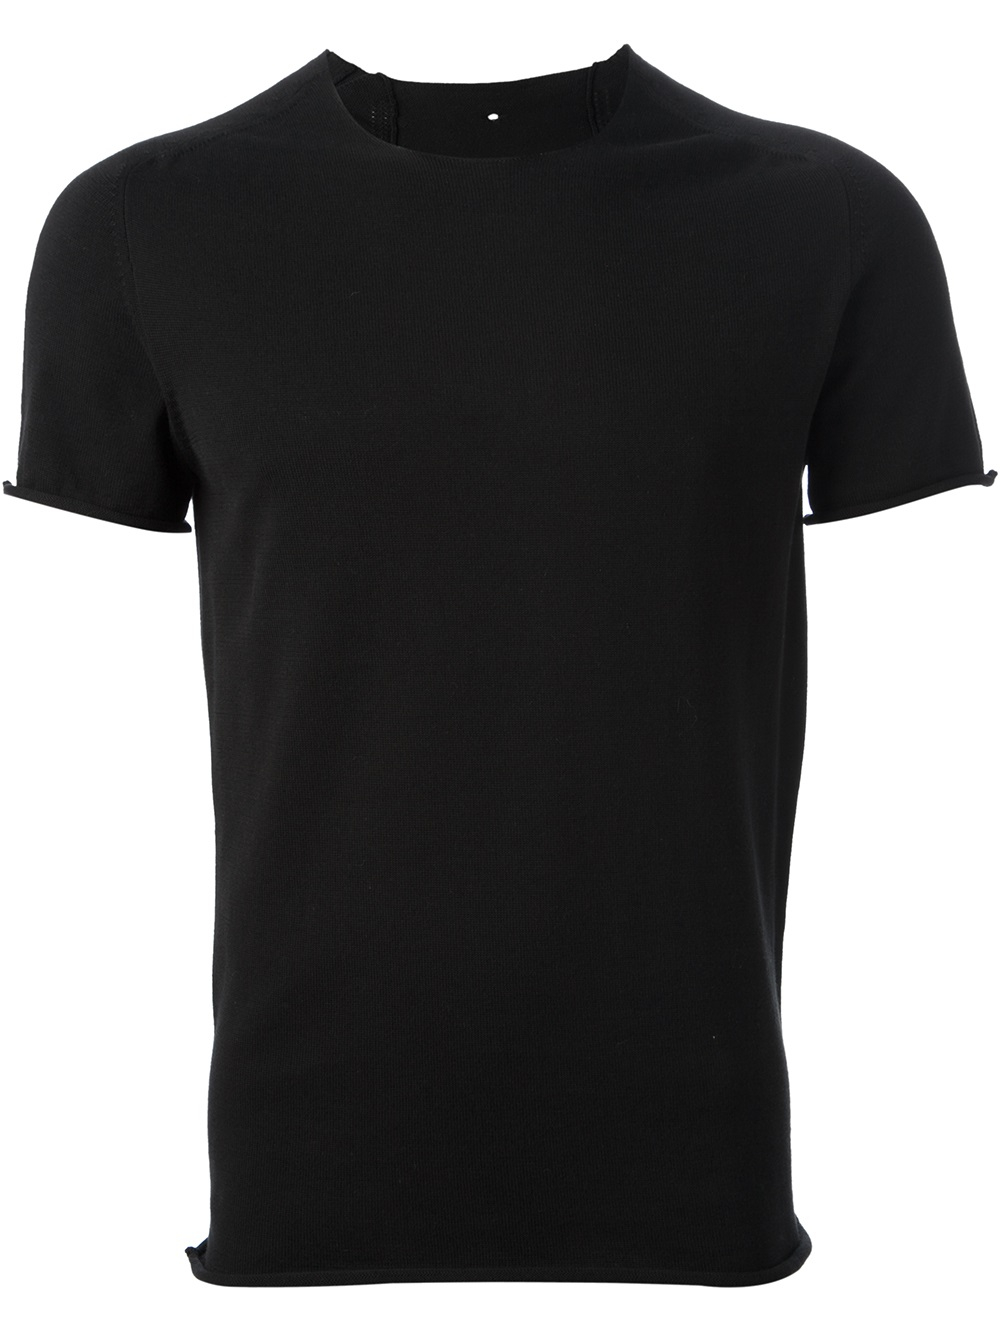 Lyst - Label Under Construction Classic T-Shirt in Black for Men